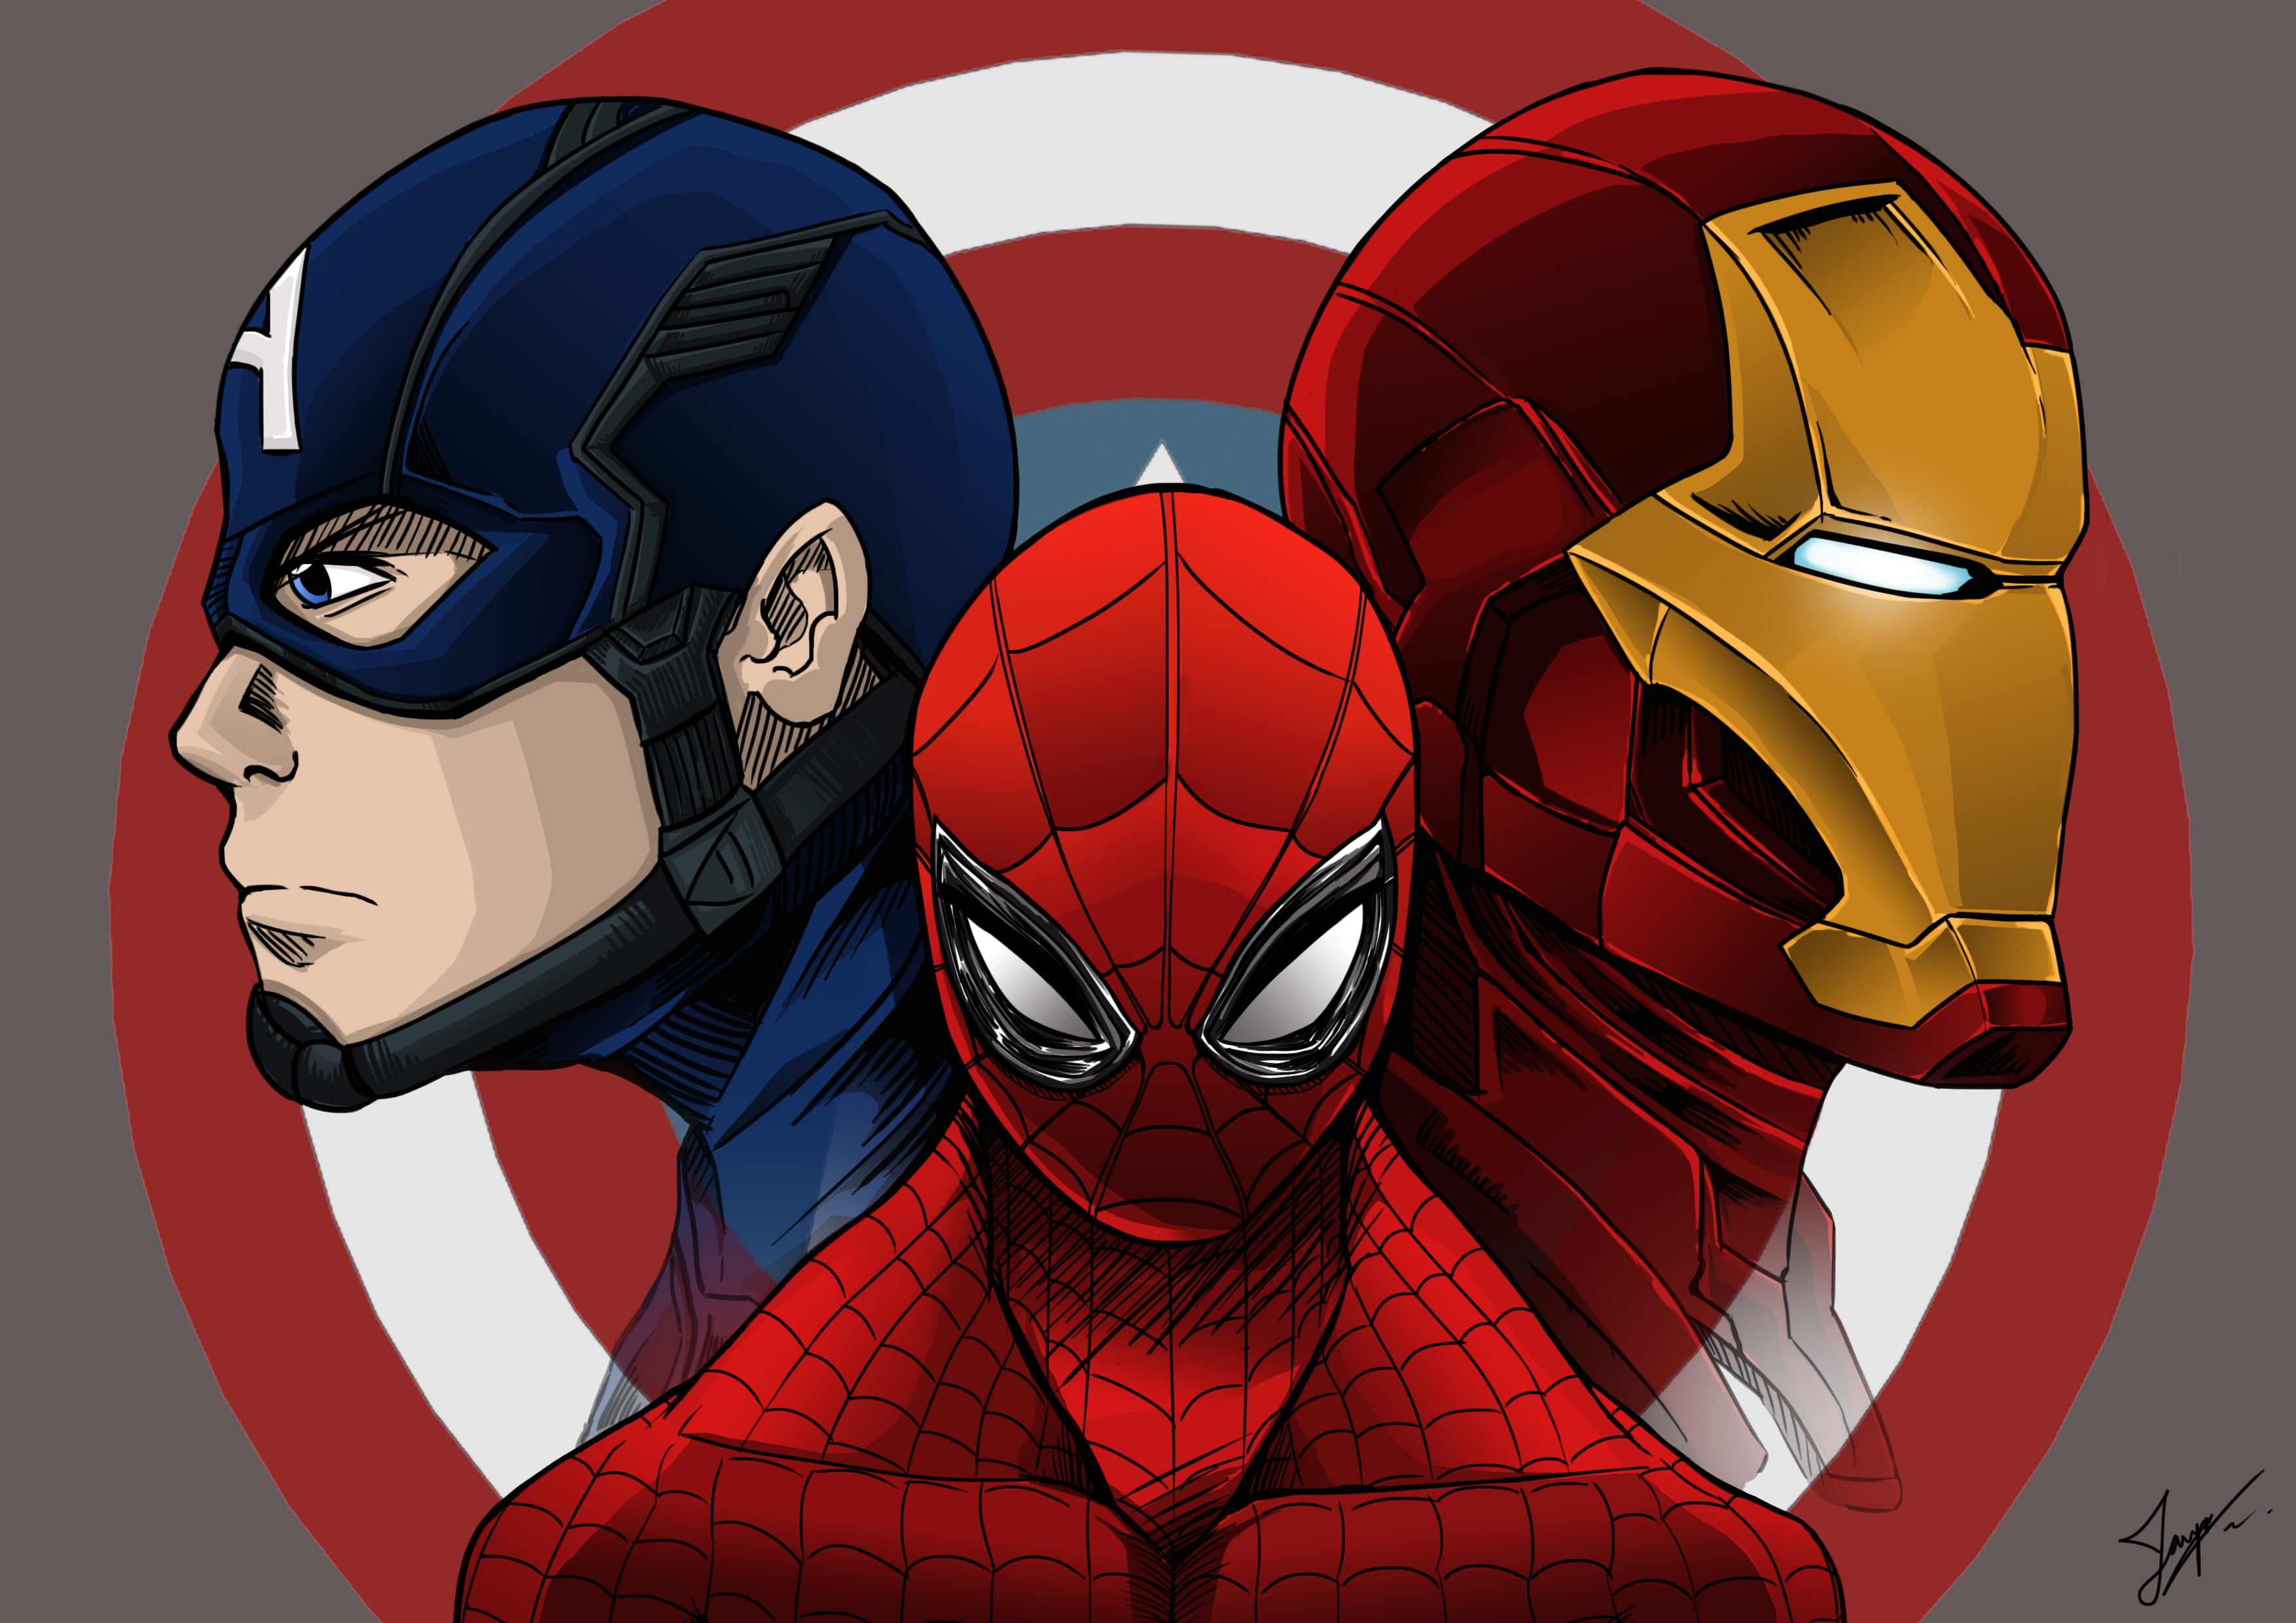 Spider-Man, Iron Man and Captain America poster HD wallpaper.